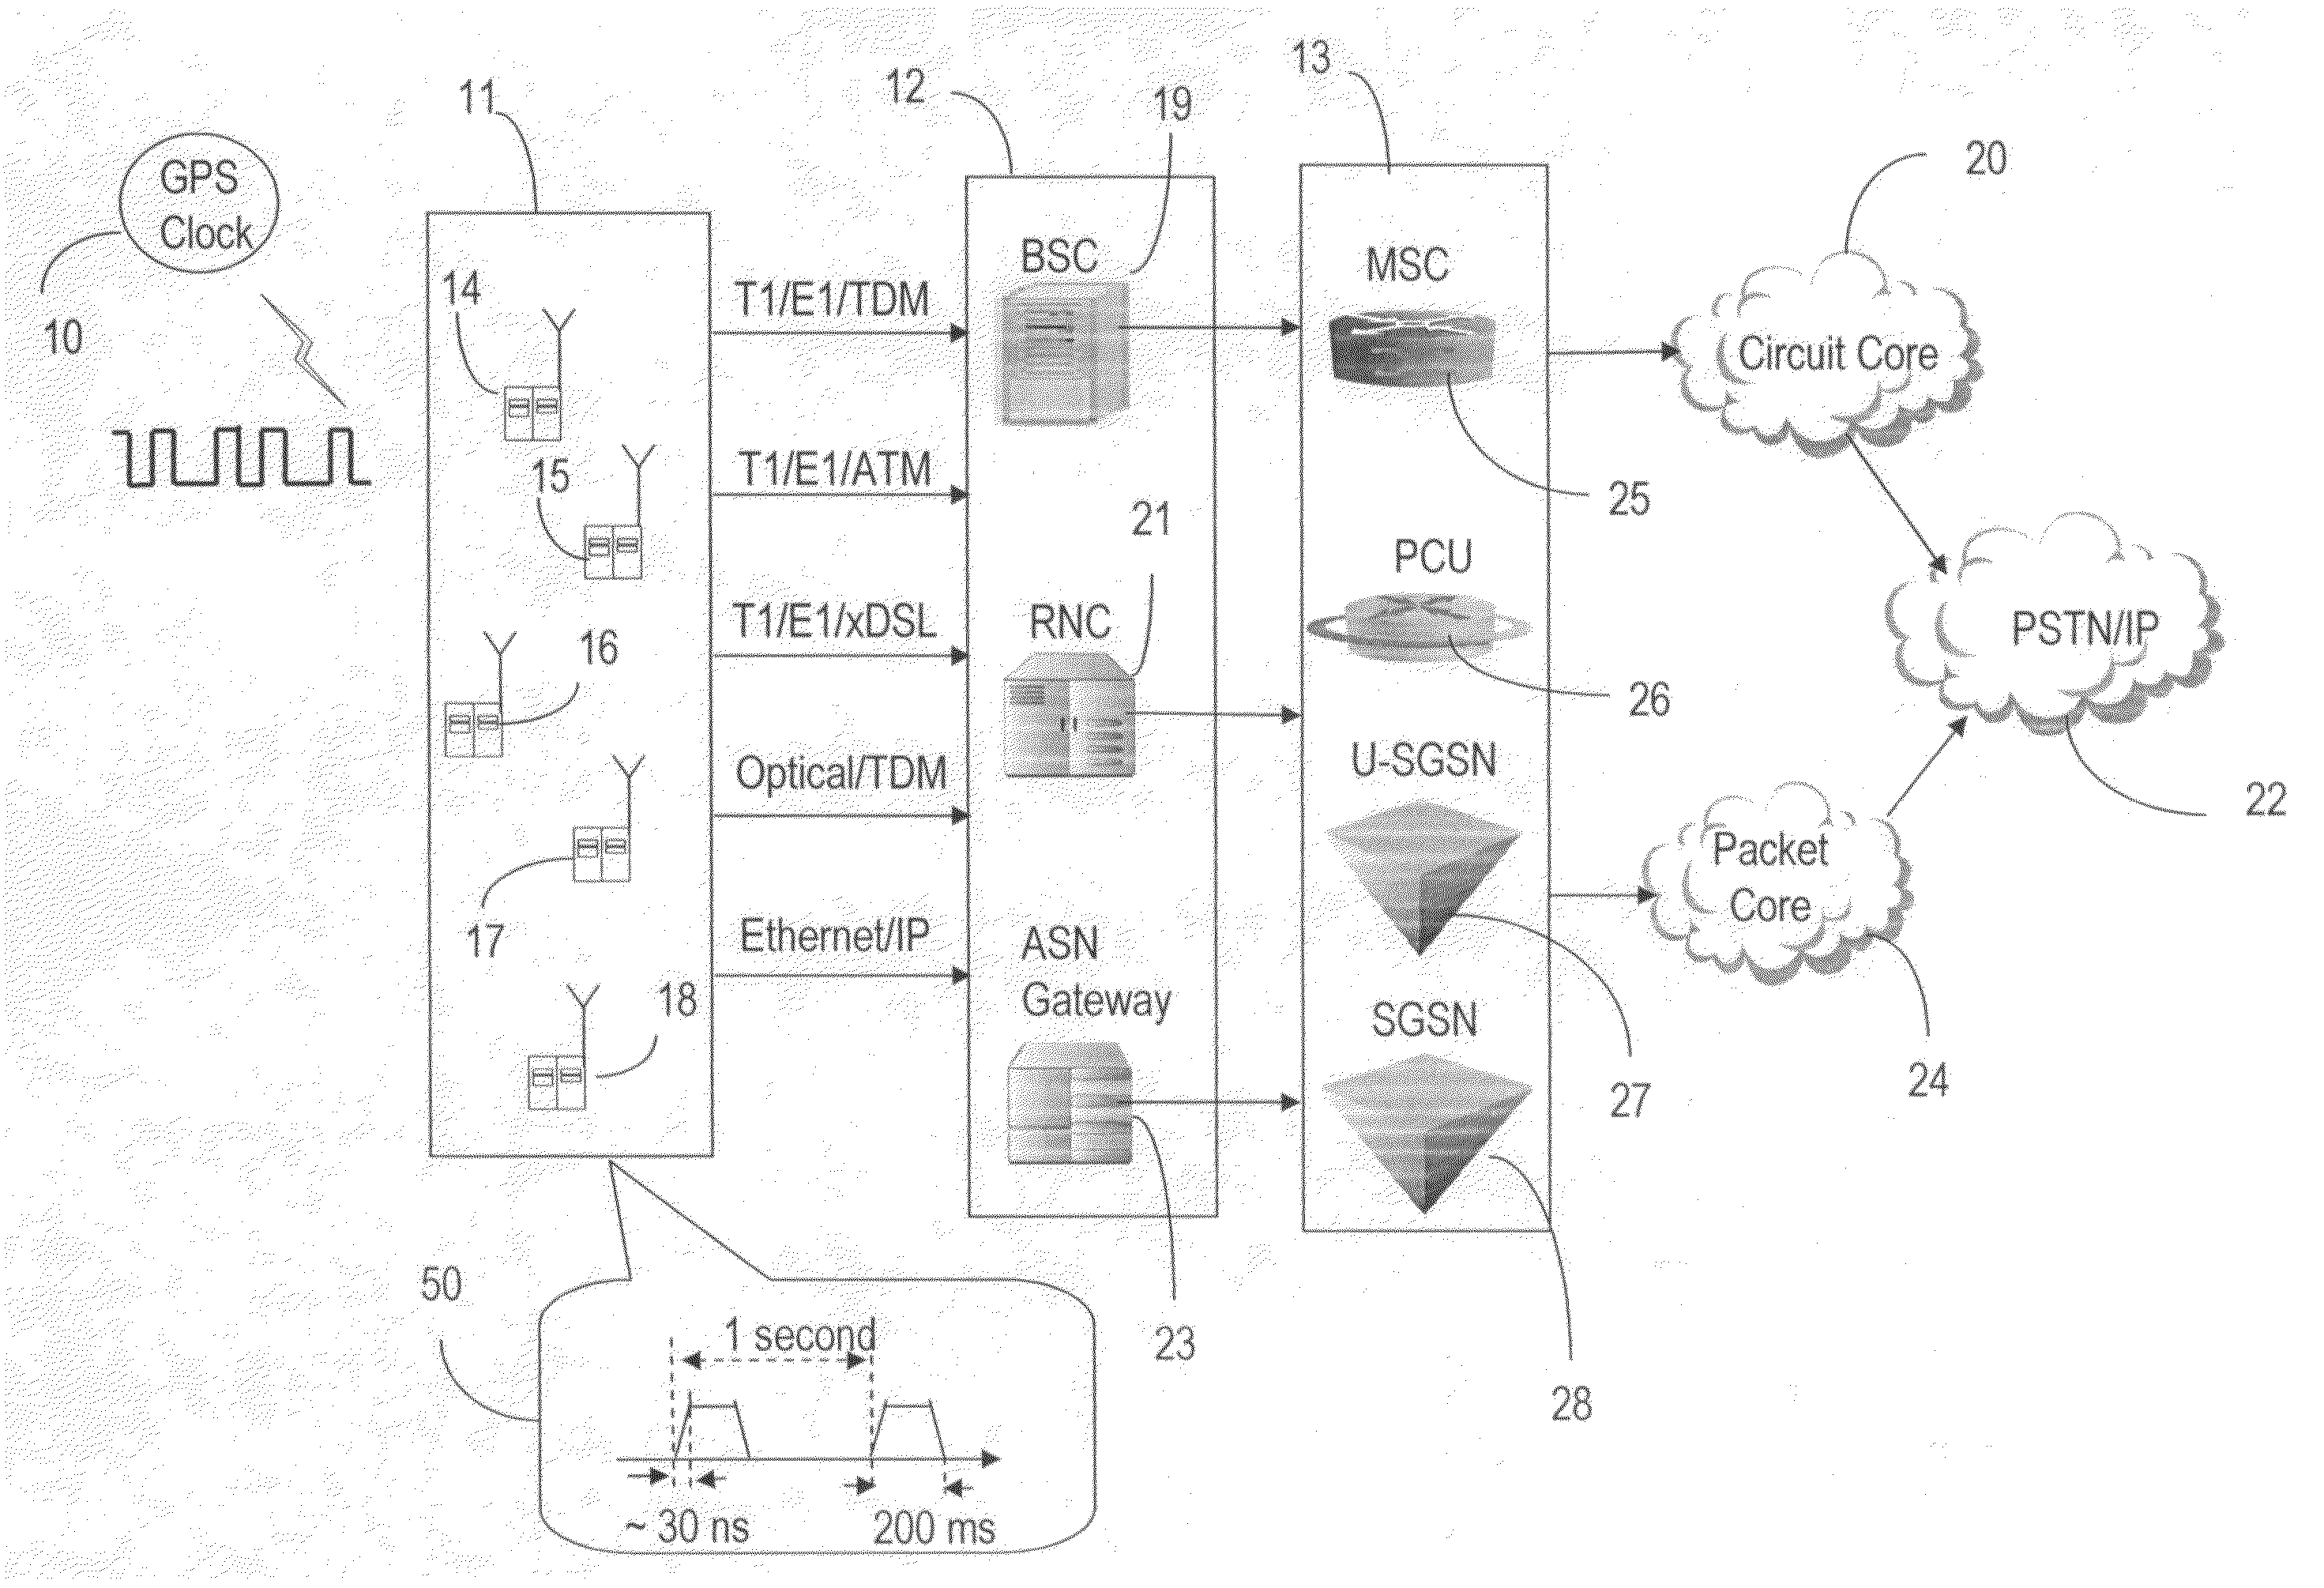 Systems and methods for distributing GPS clock to communications devices